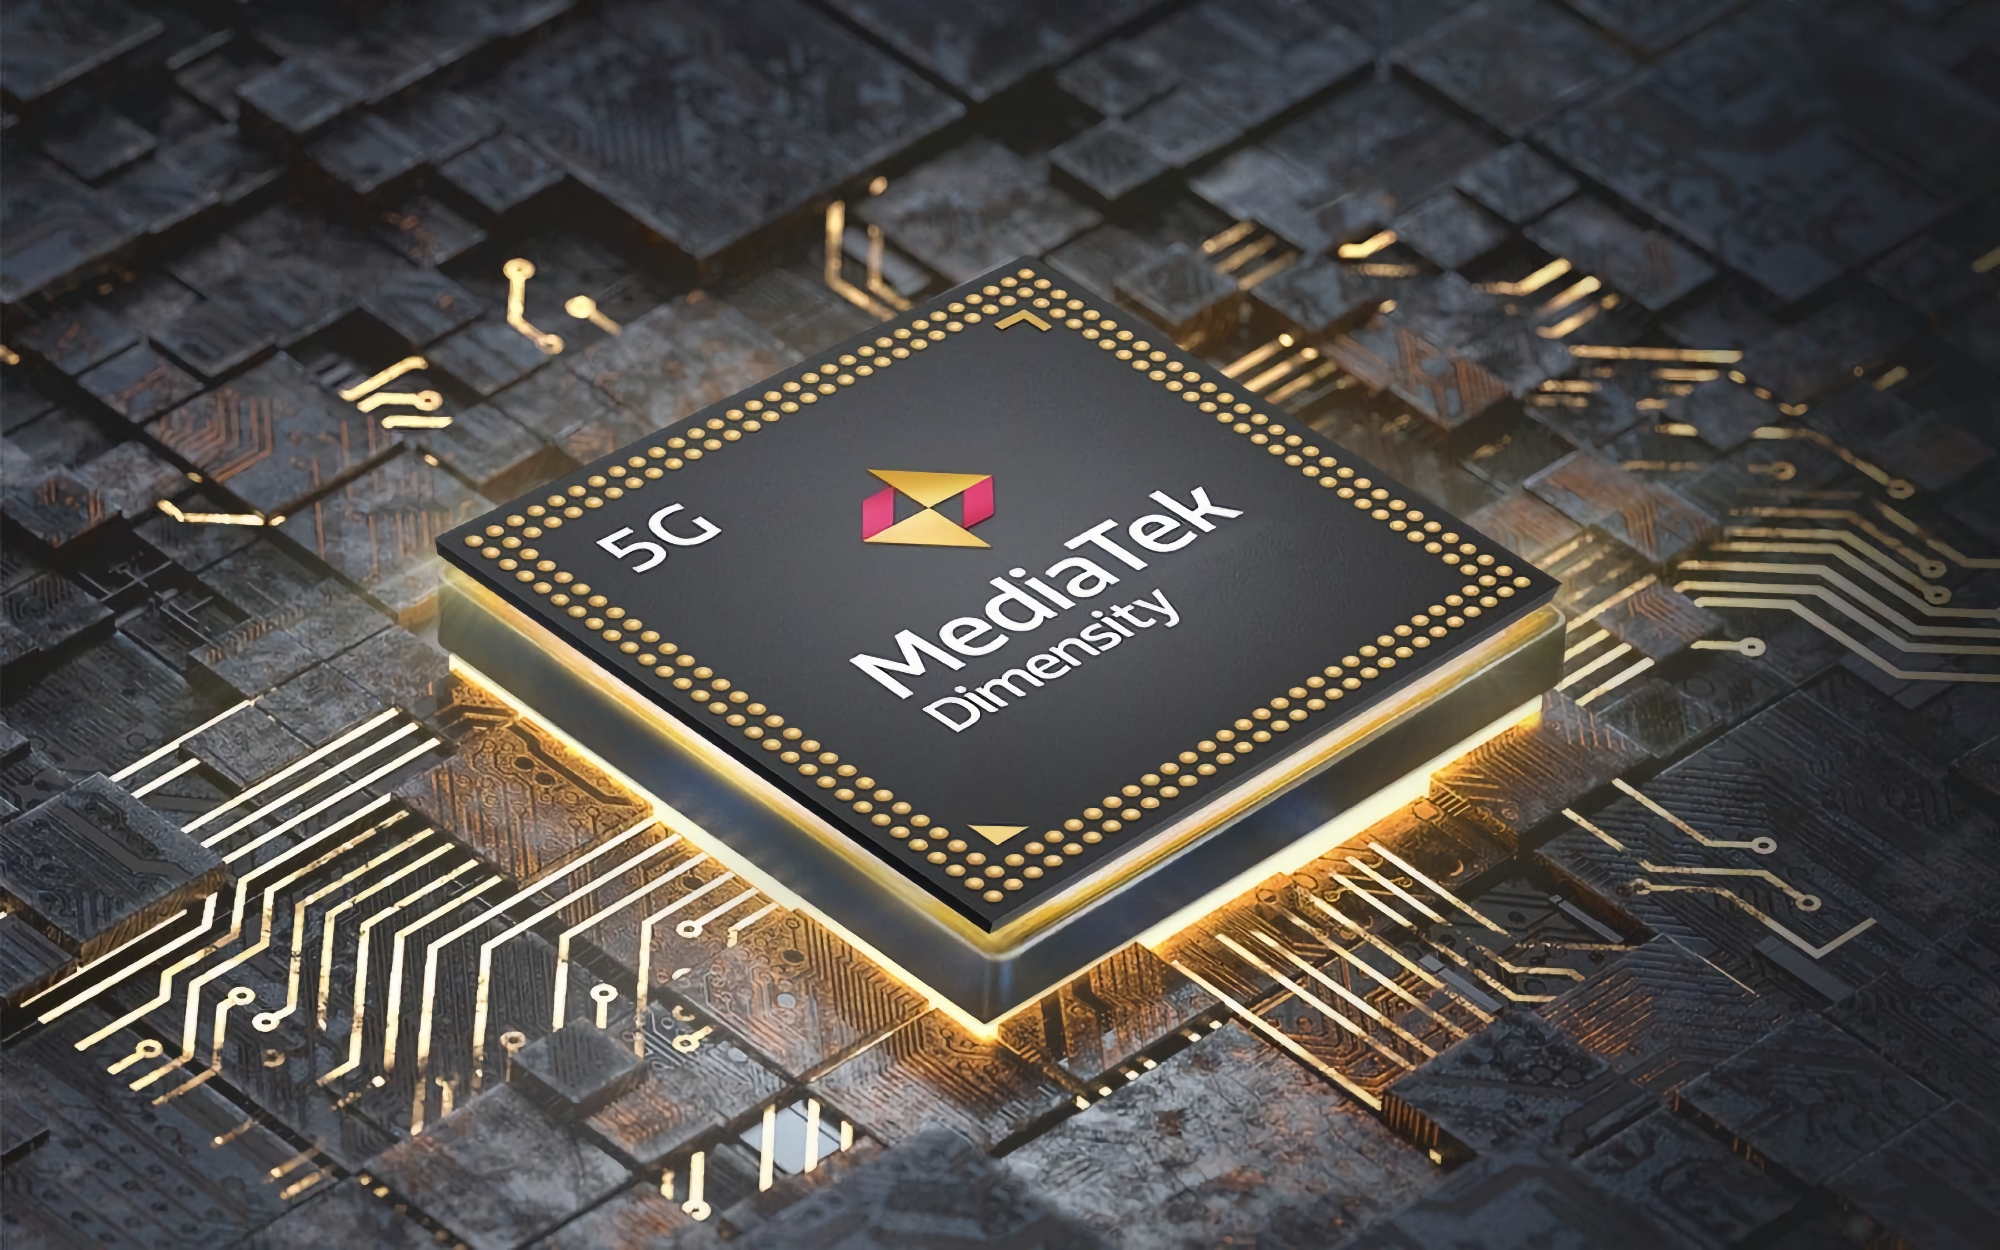 MediaTek Dimensity 7000 will be built on 5nm process technology and will support charging up to 75W